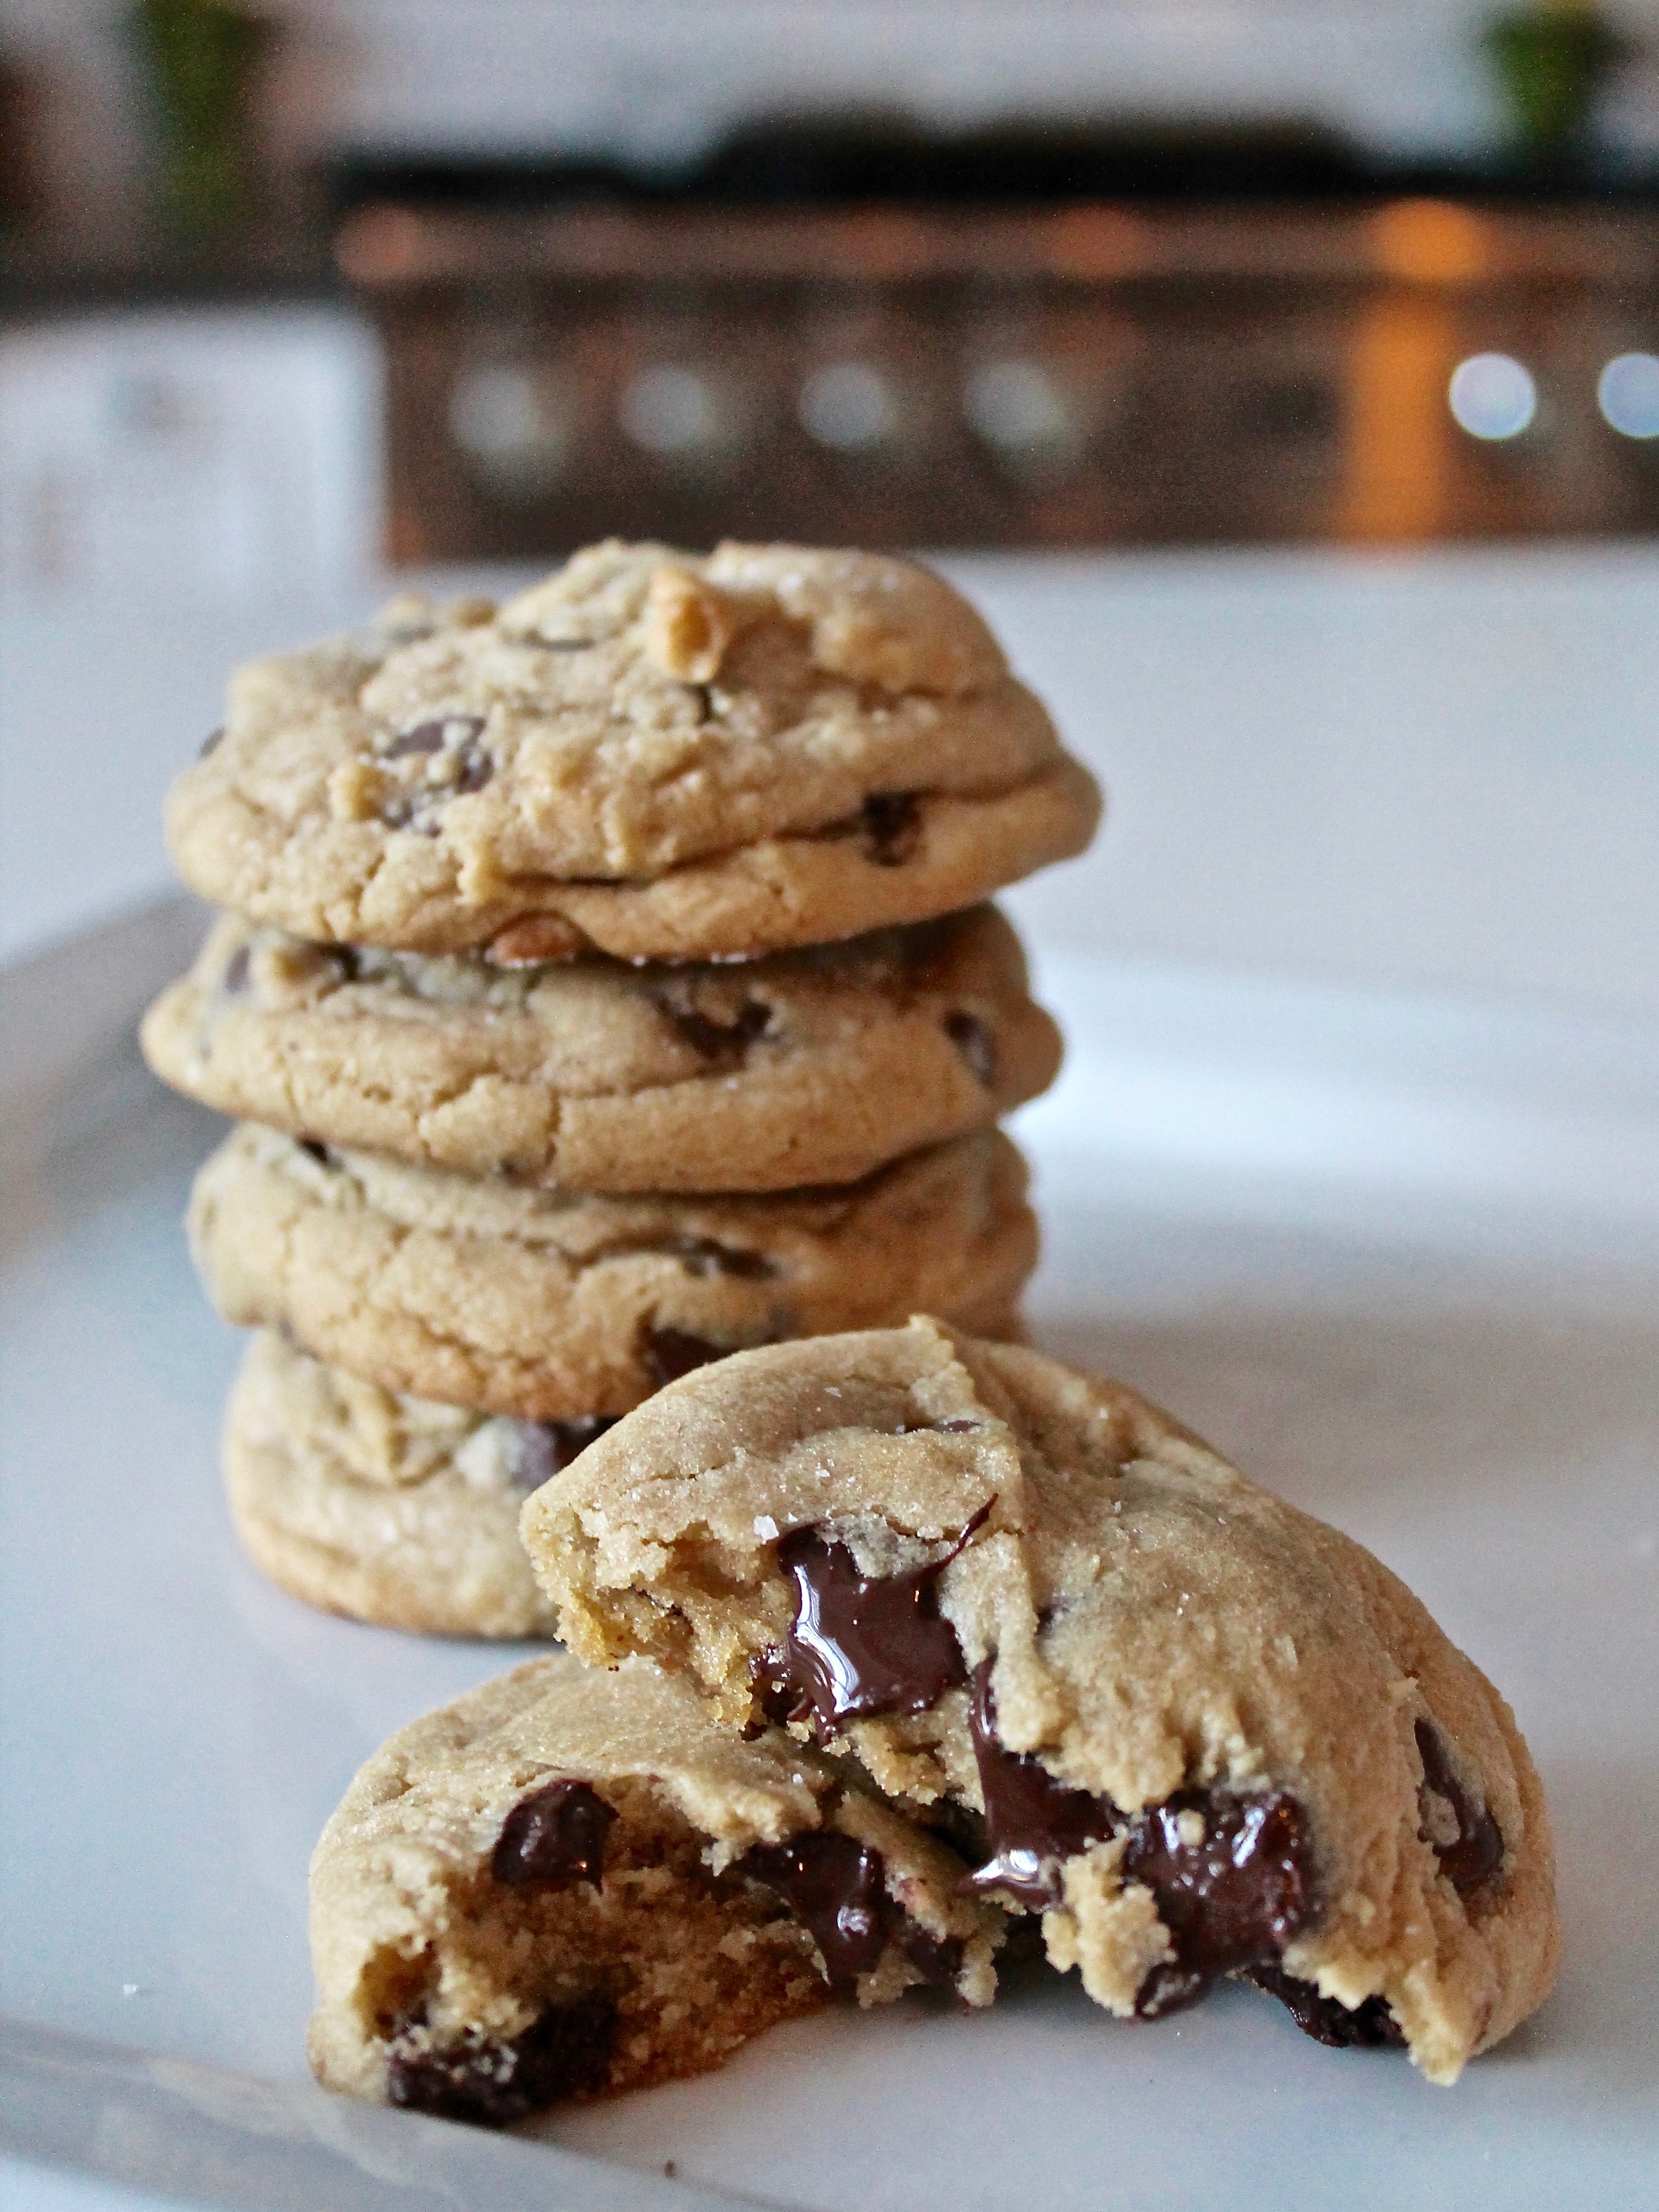 You'll want to eat this chocolate chip cookie dough before you have a chance to cook it! www.cakebycourtney.com